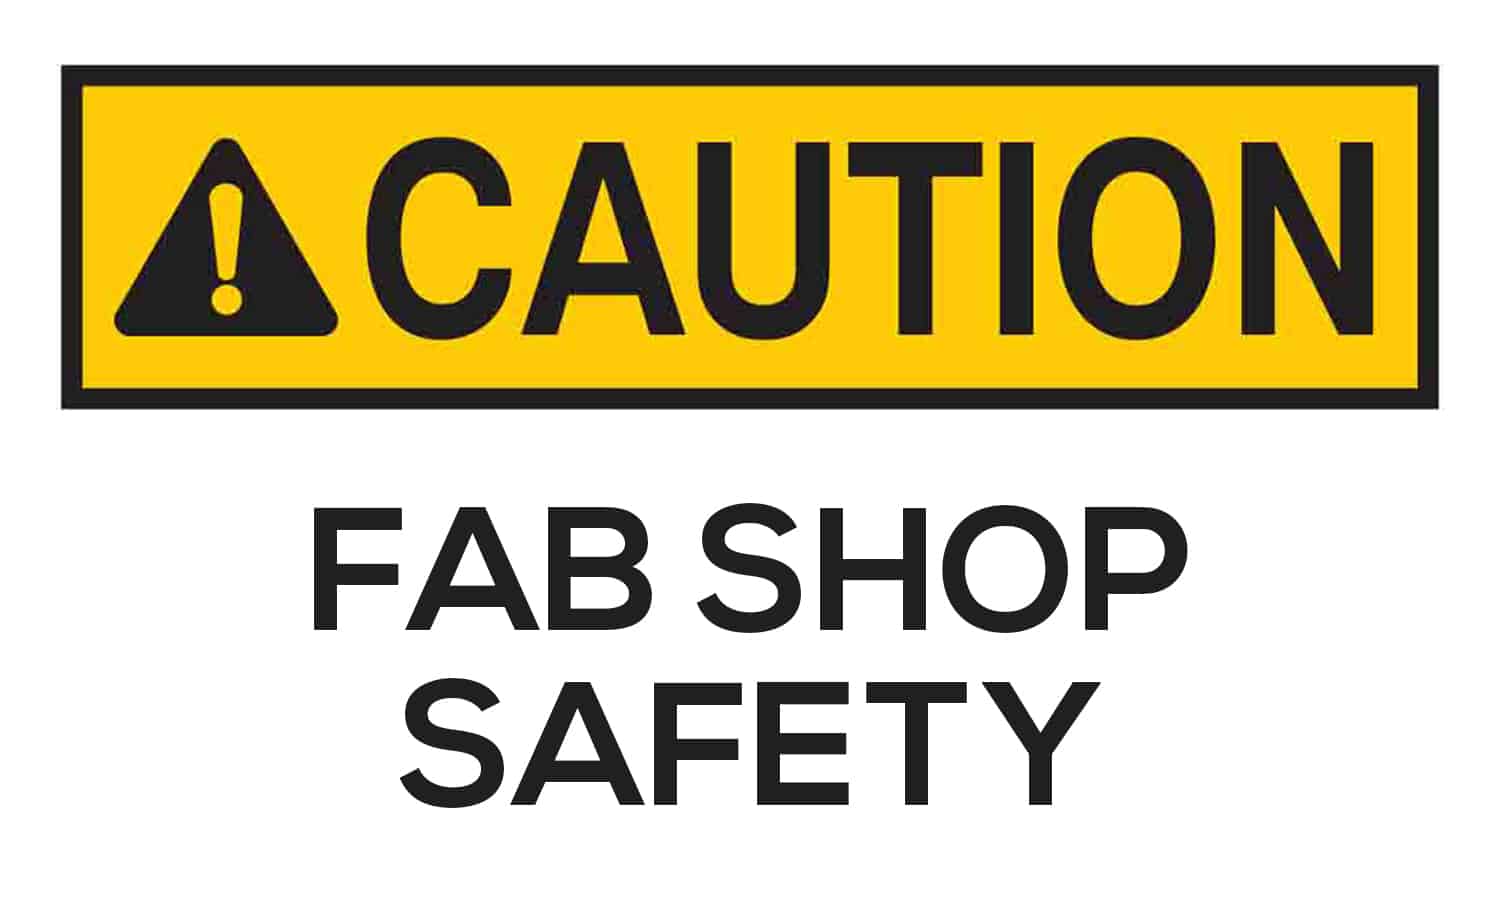 Fab Shop Safety: Unnecessary Risks